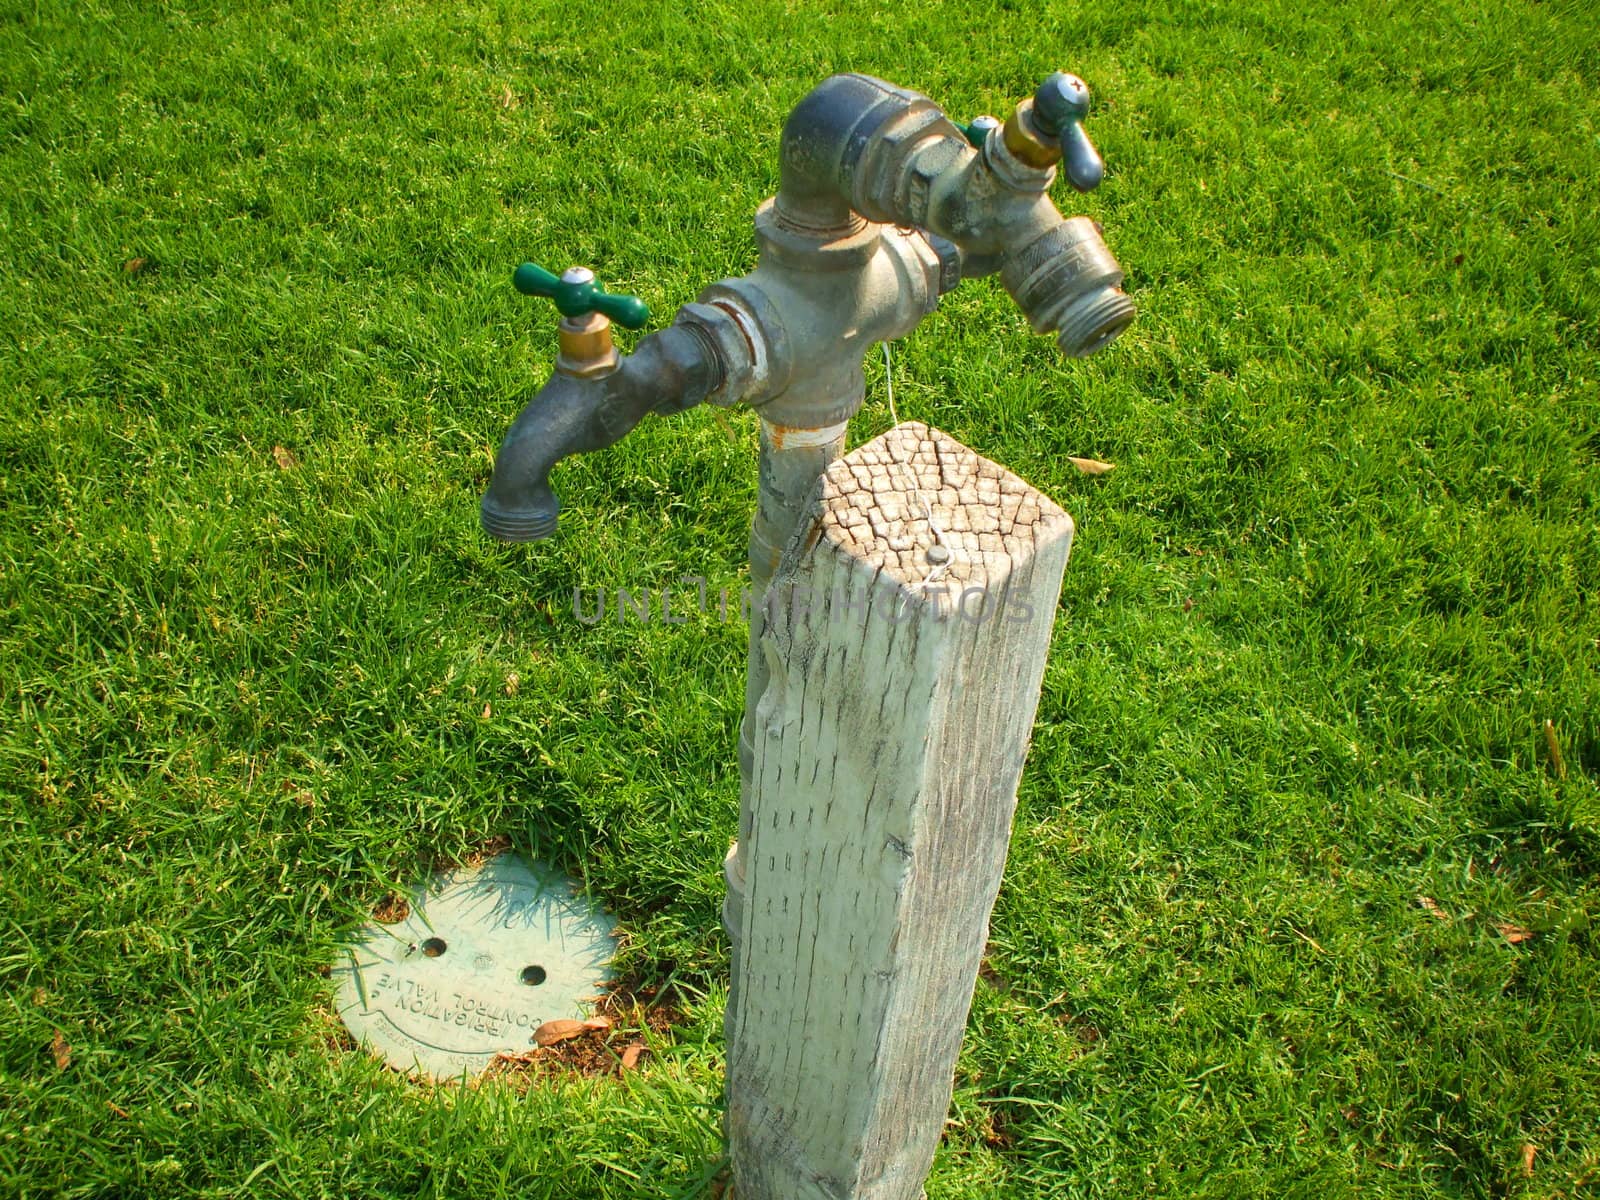 Drinking fountains on a sidewalk in a park.